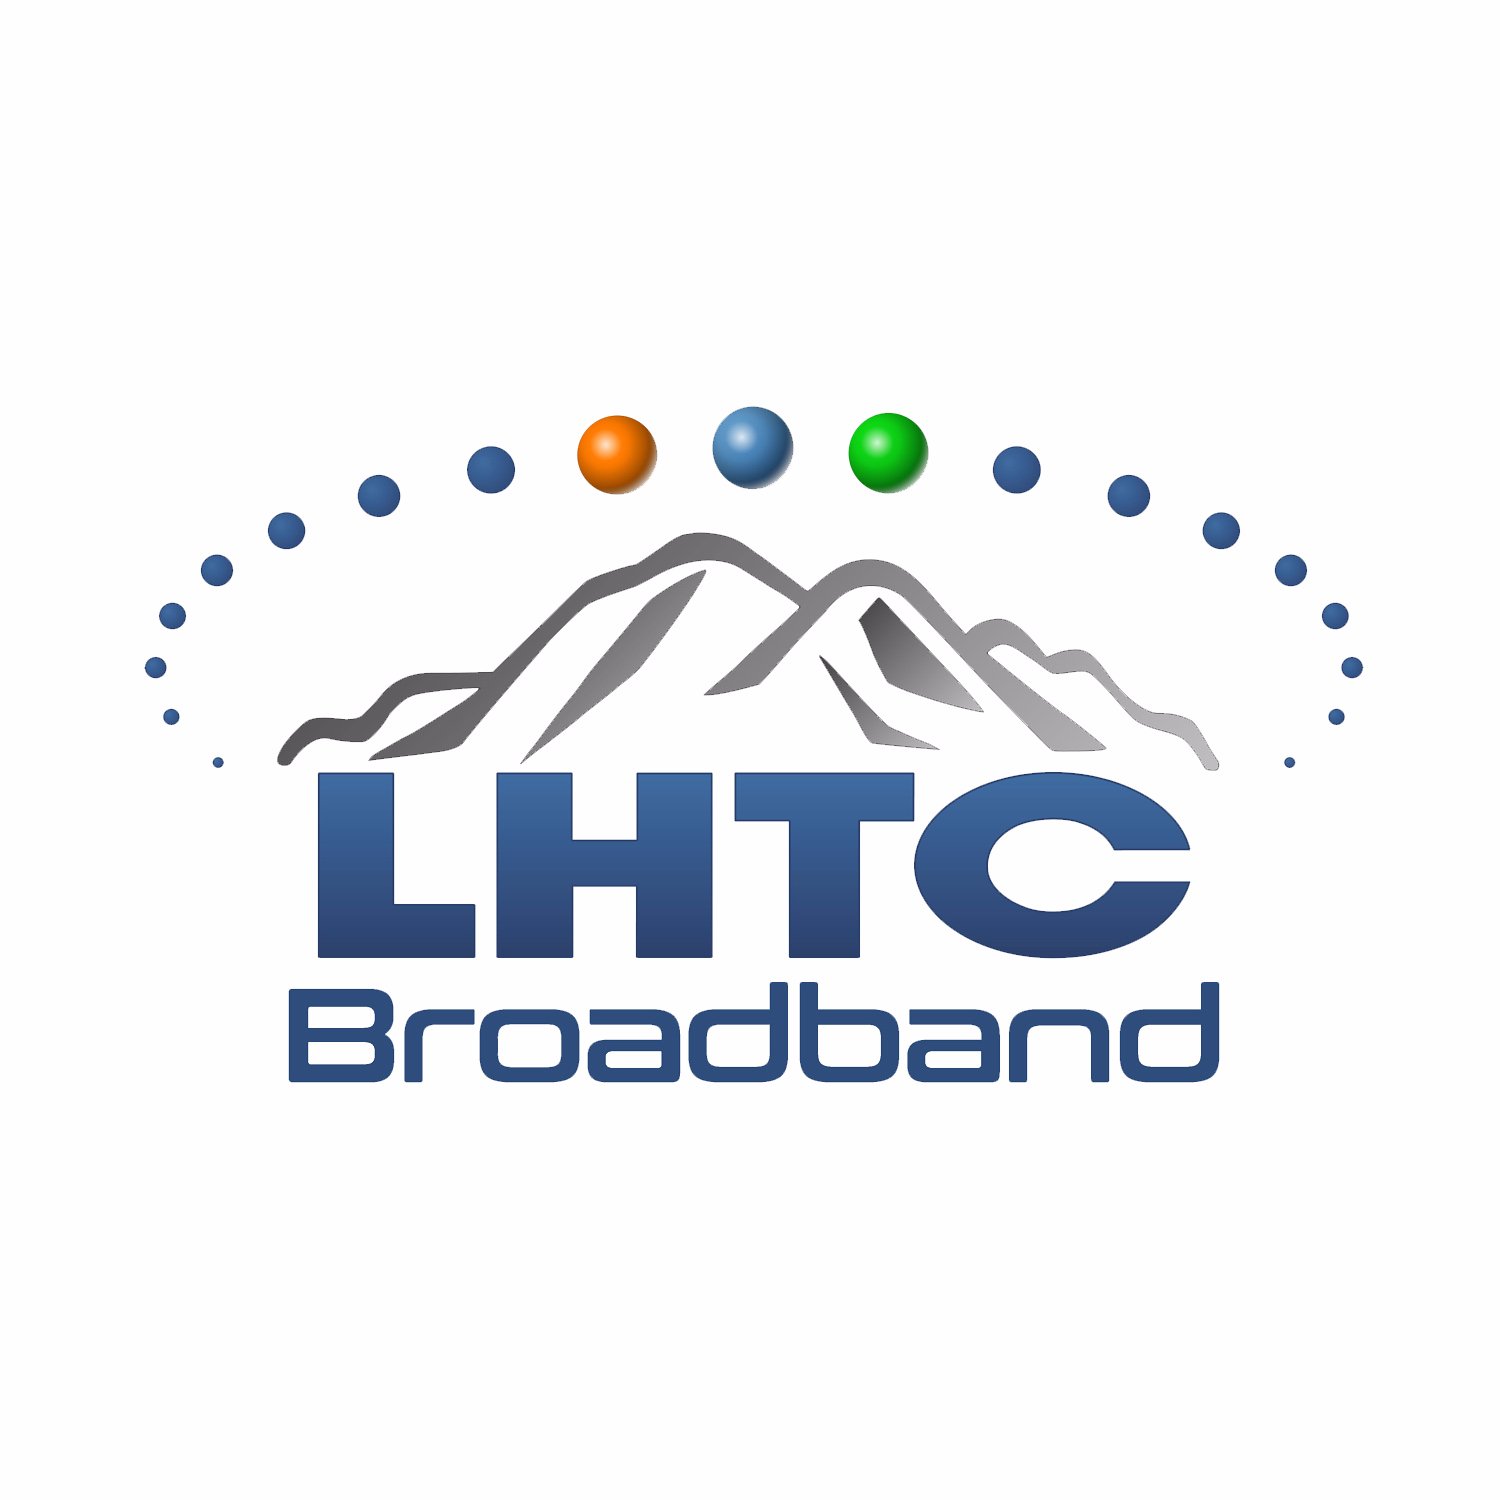 LHTC Broadband provides telephone, digital TV & high speed Internet services in these locations in PA: Laurel Highlands Area, Yukon, South Canaan, Lackawaxen.